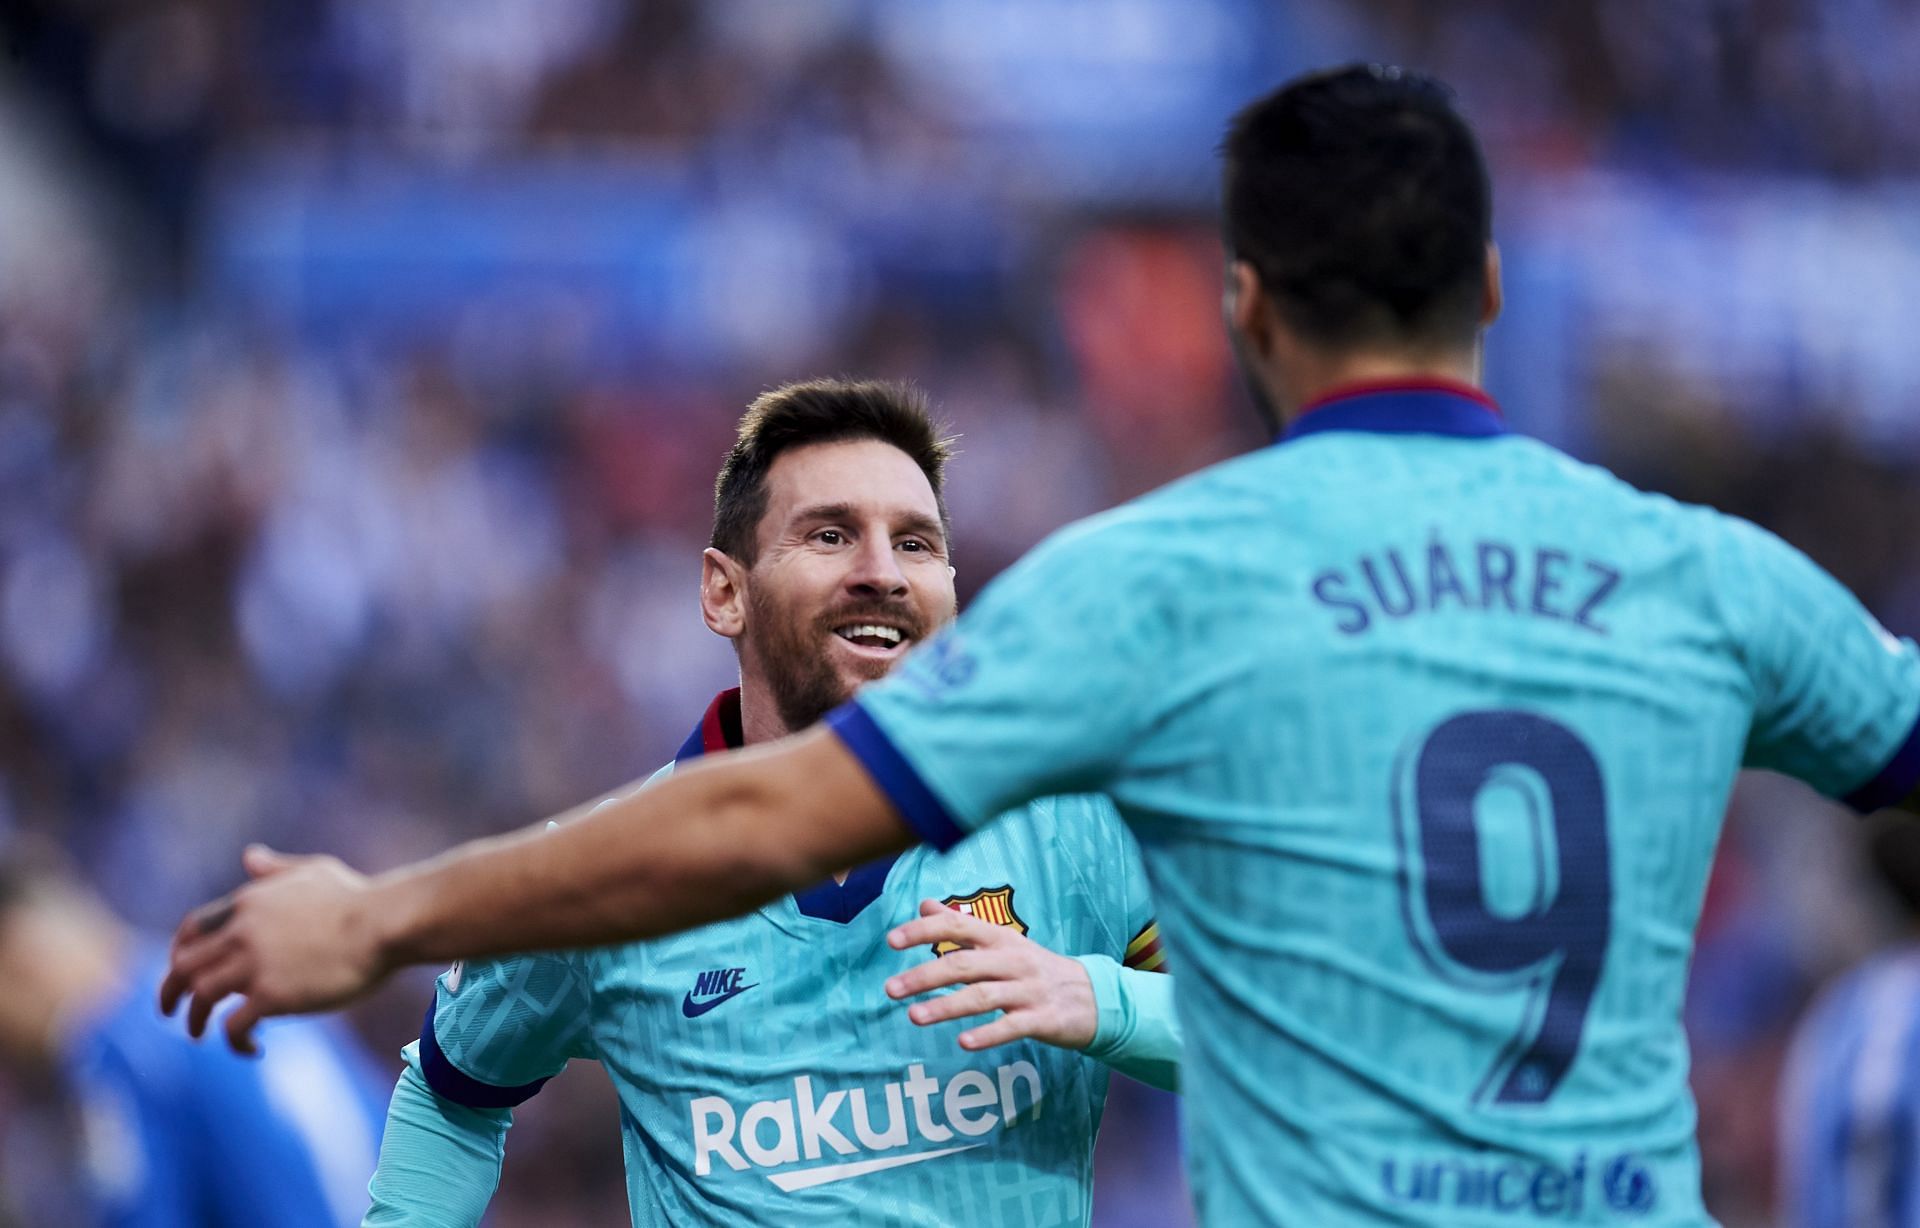 Messi has assisted Suarez on 39 occasions in his career